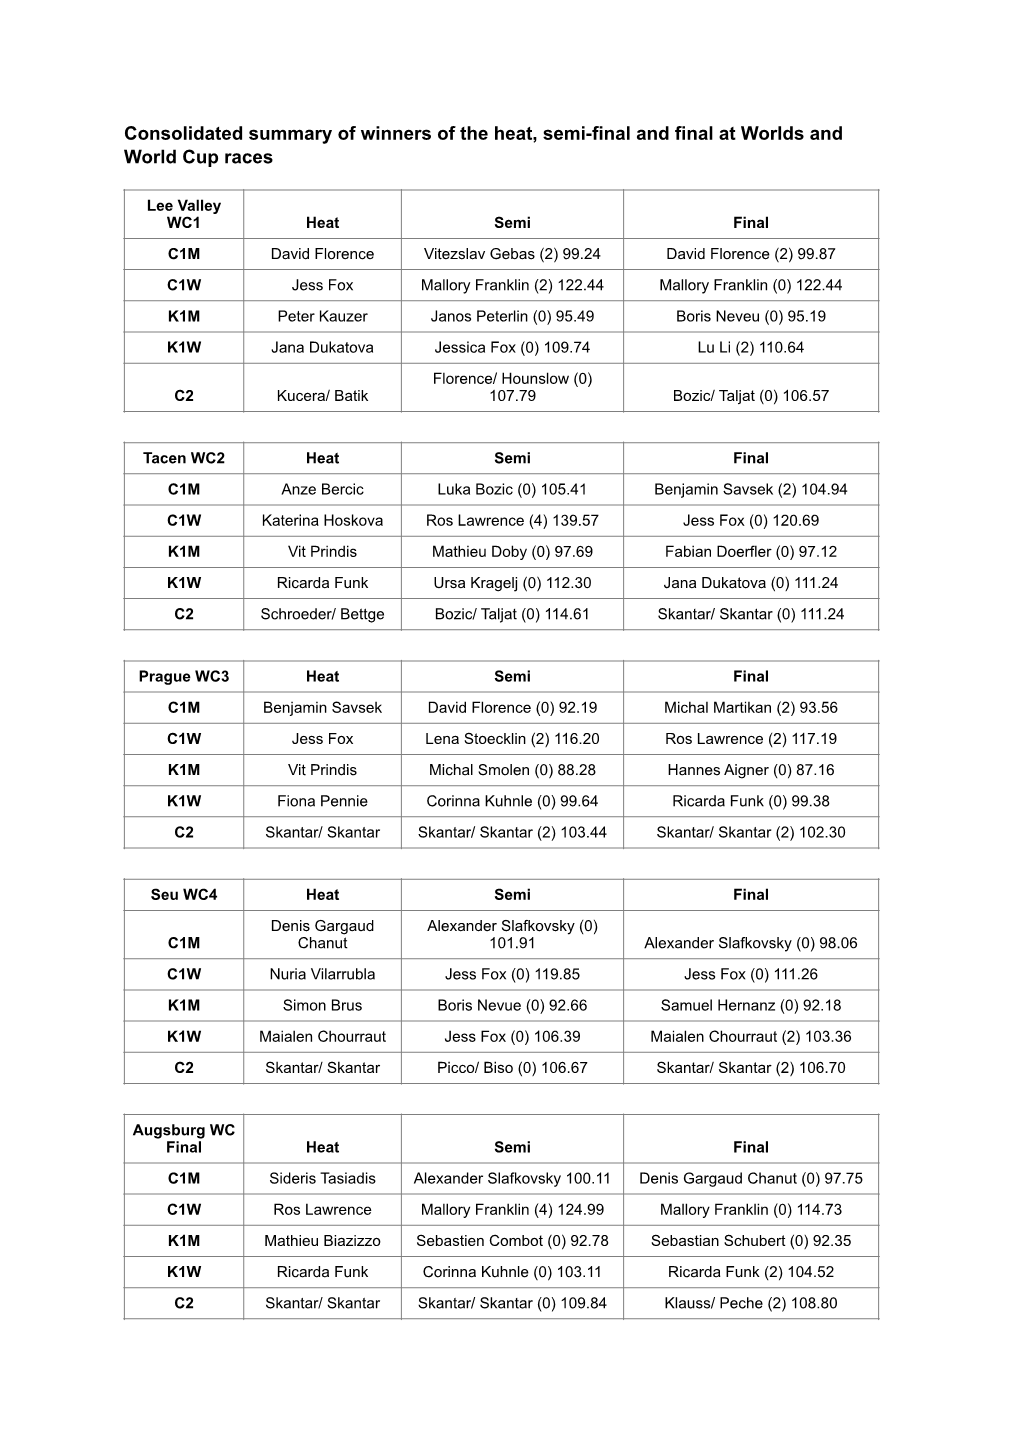 Consolidated Summary of Winners of the Heat, Semi-Final and Final at Worlds and World Cup Races